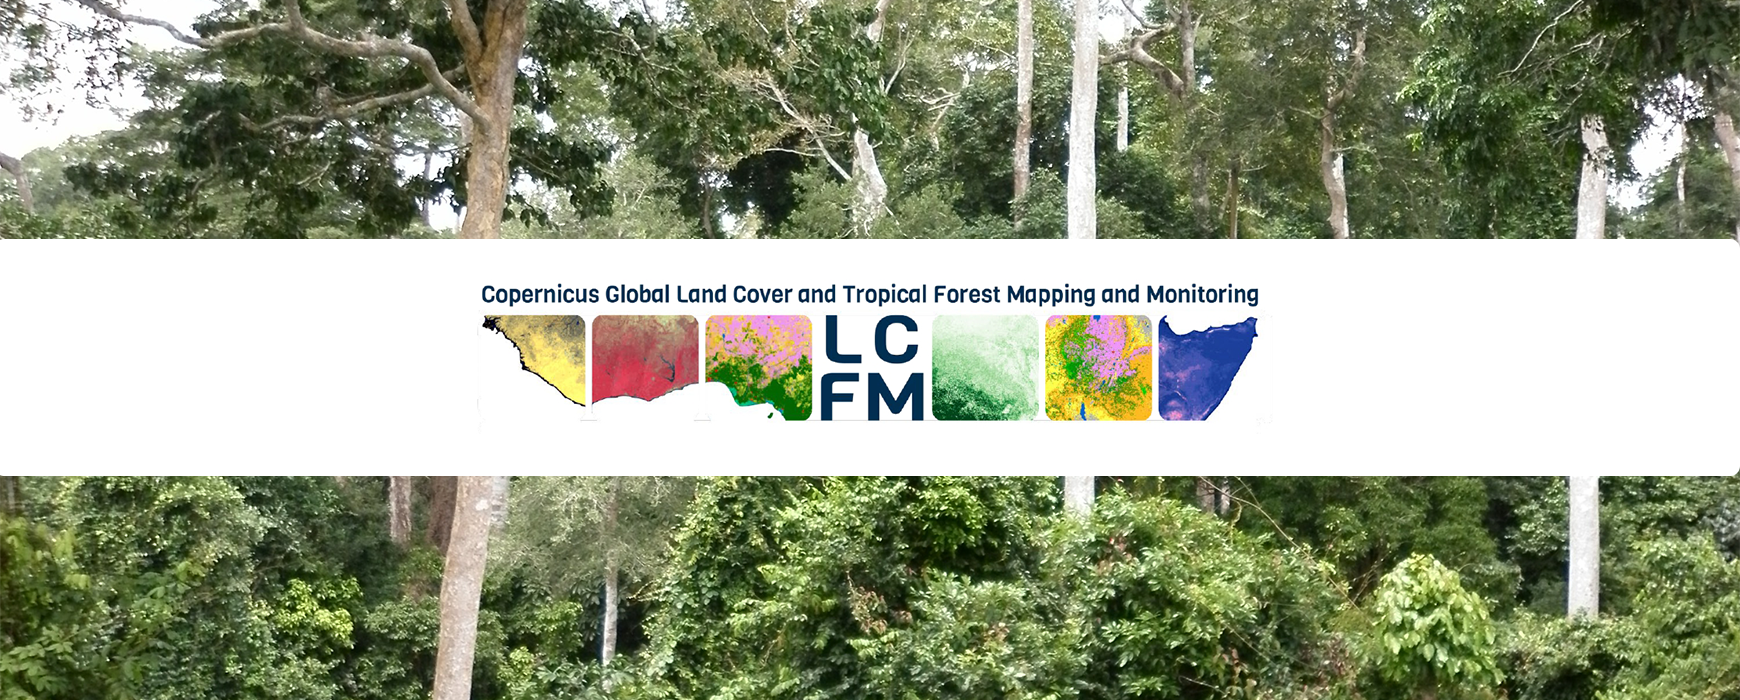 IGN FI au cœur du Nouveau Service Copernicus Global Land Cover and Tropical Forest Mapping and Monitoring (LCFM)